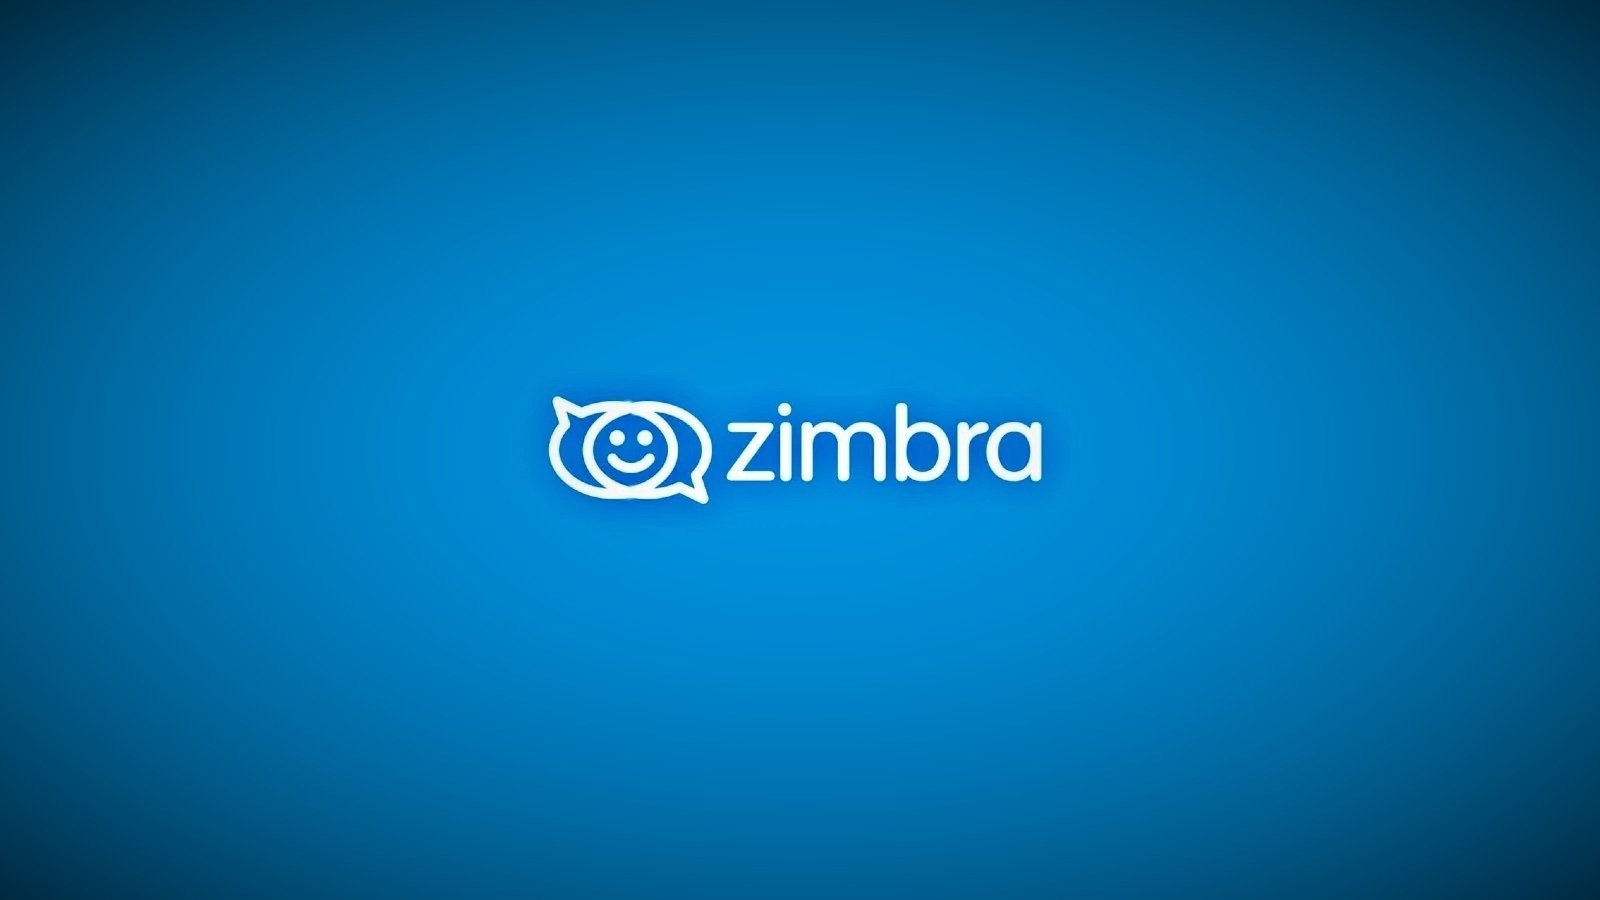 Phishing campaign steals accounts for Zimbra email servers worlwide – Source: www.bleepingcomputer.com